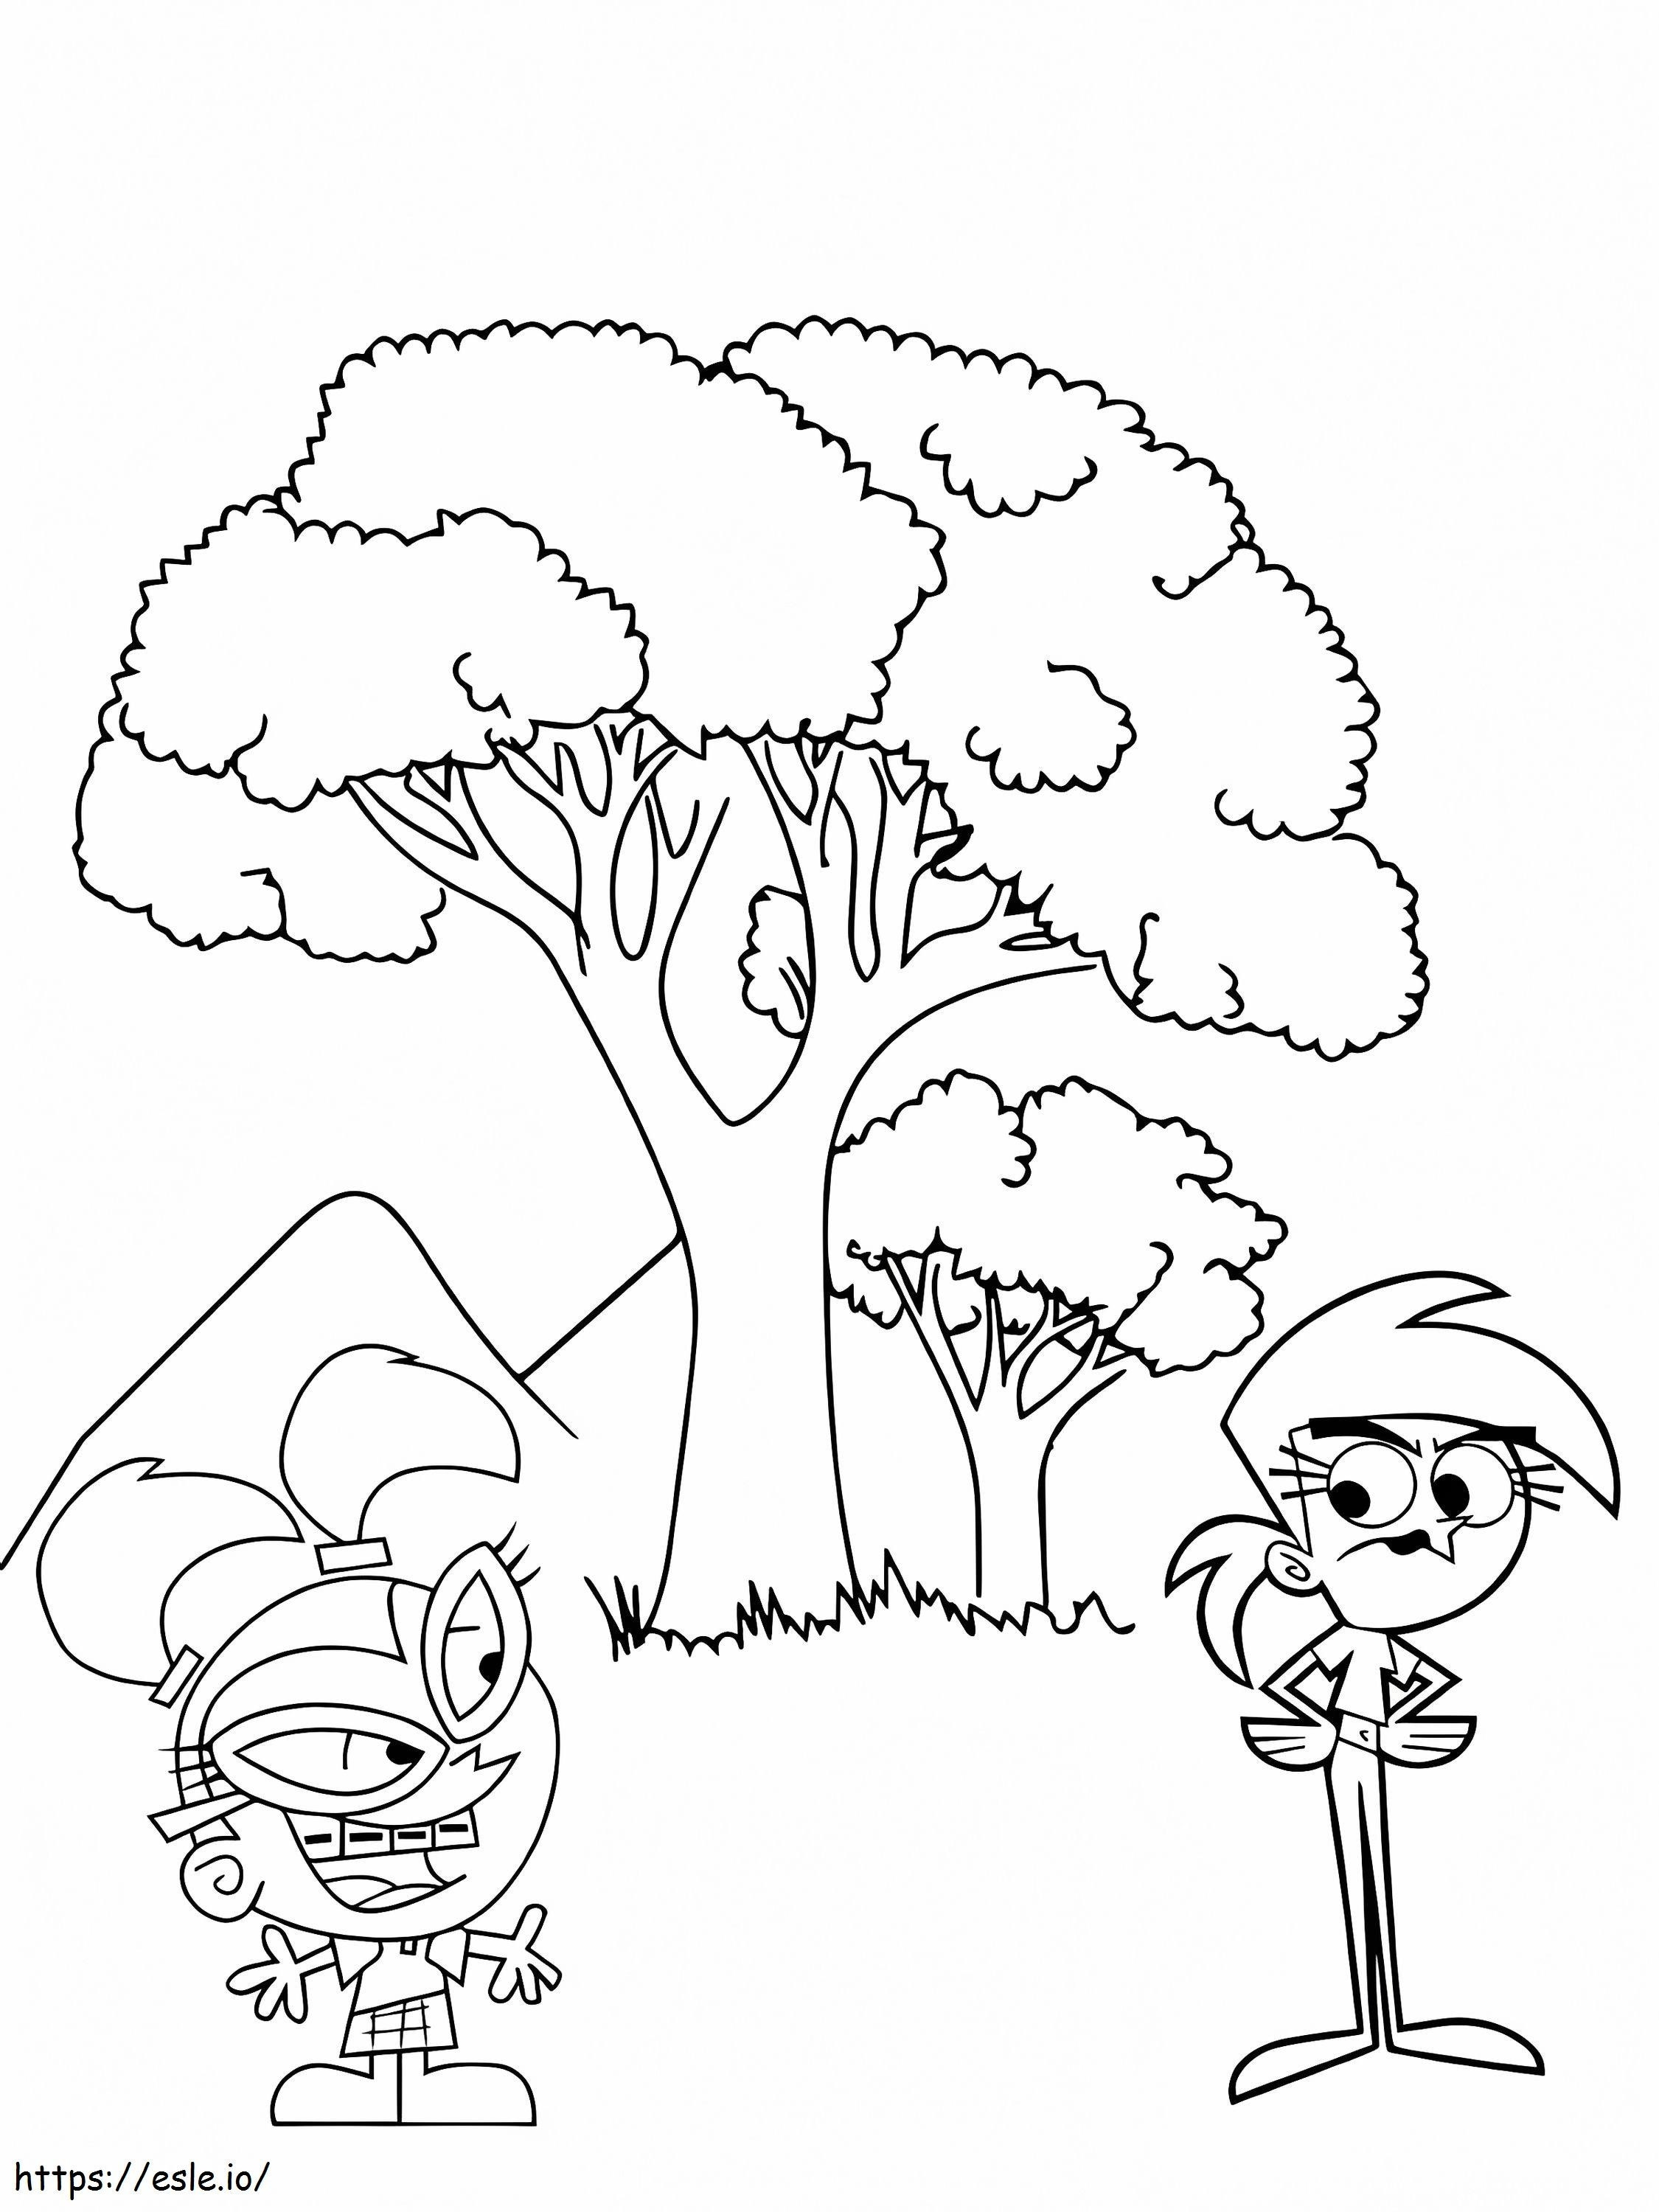 Tootie And Vicky In Forest coloring page